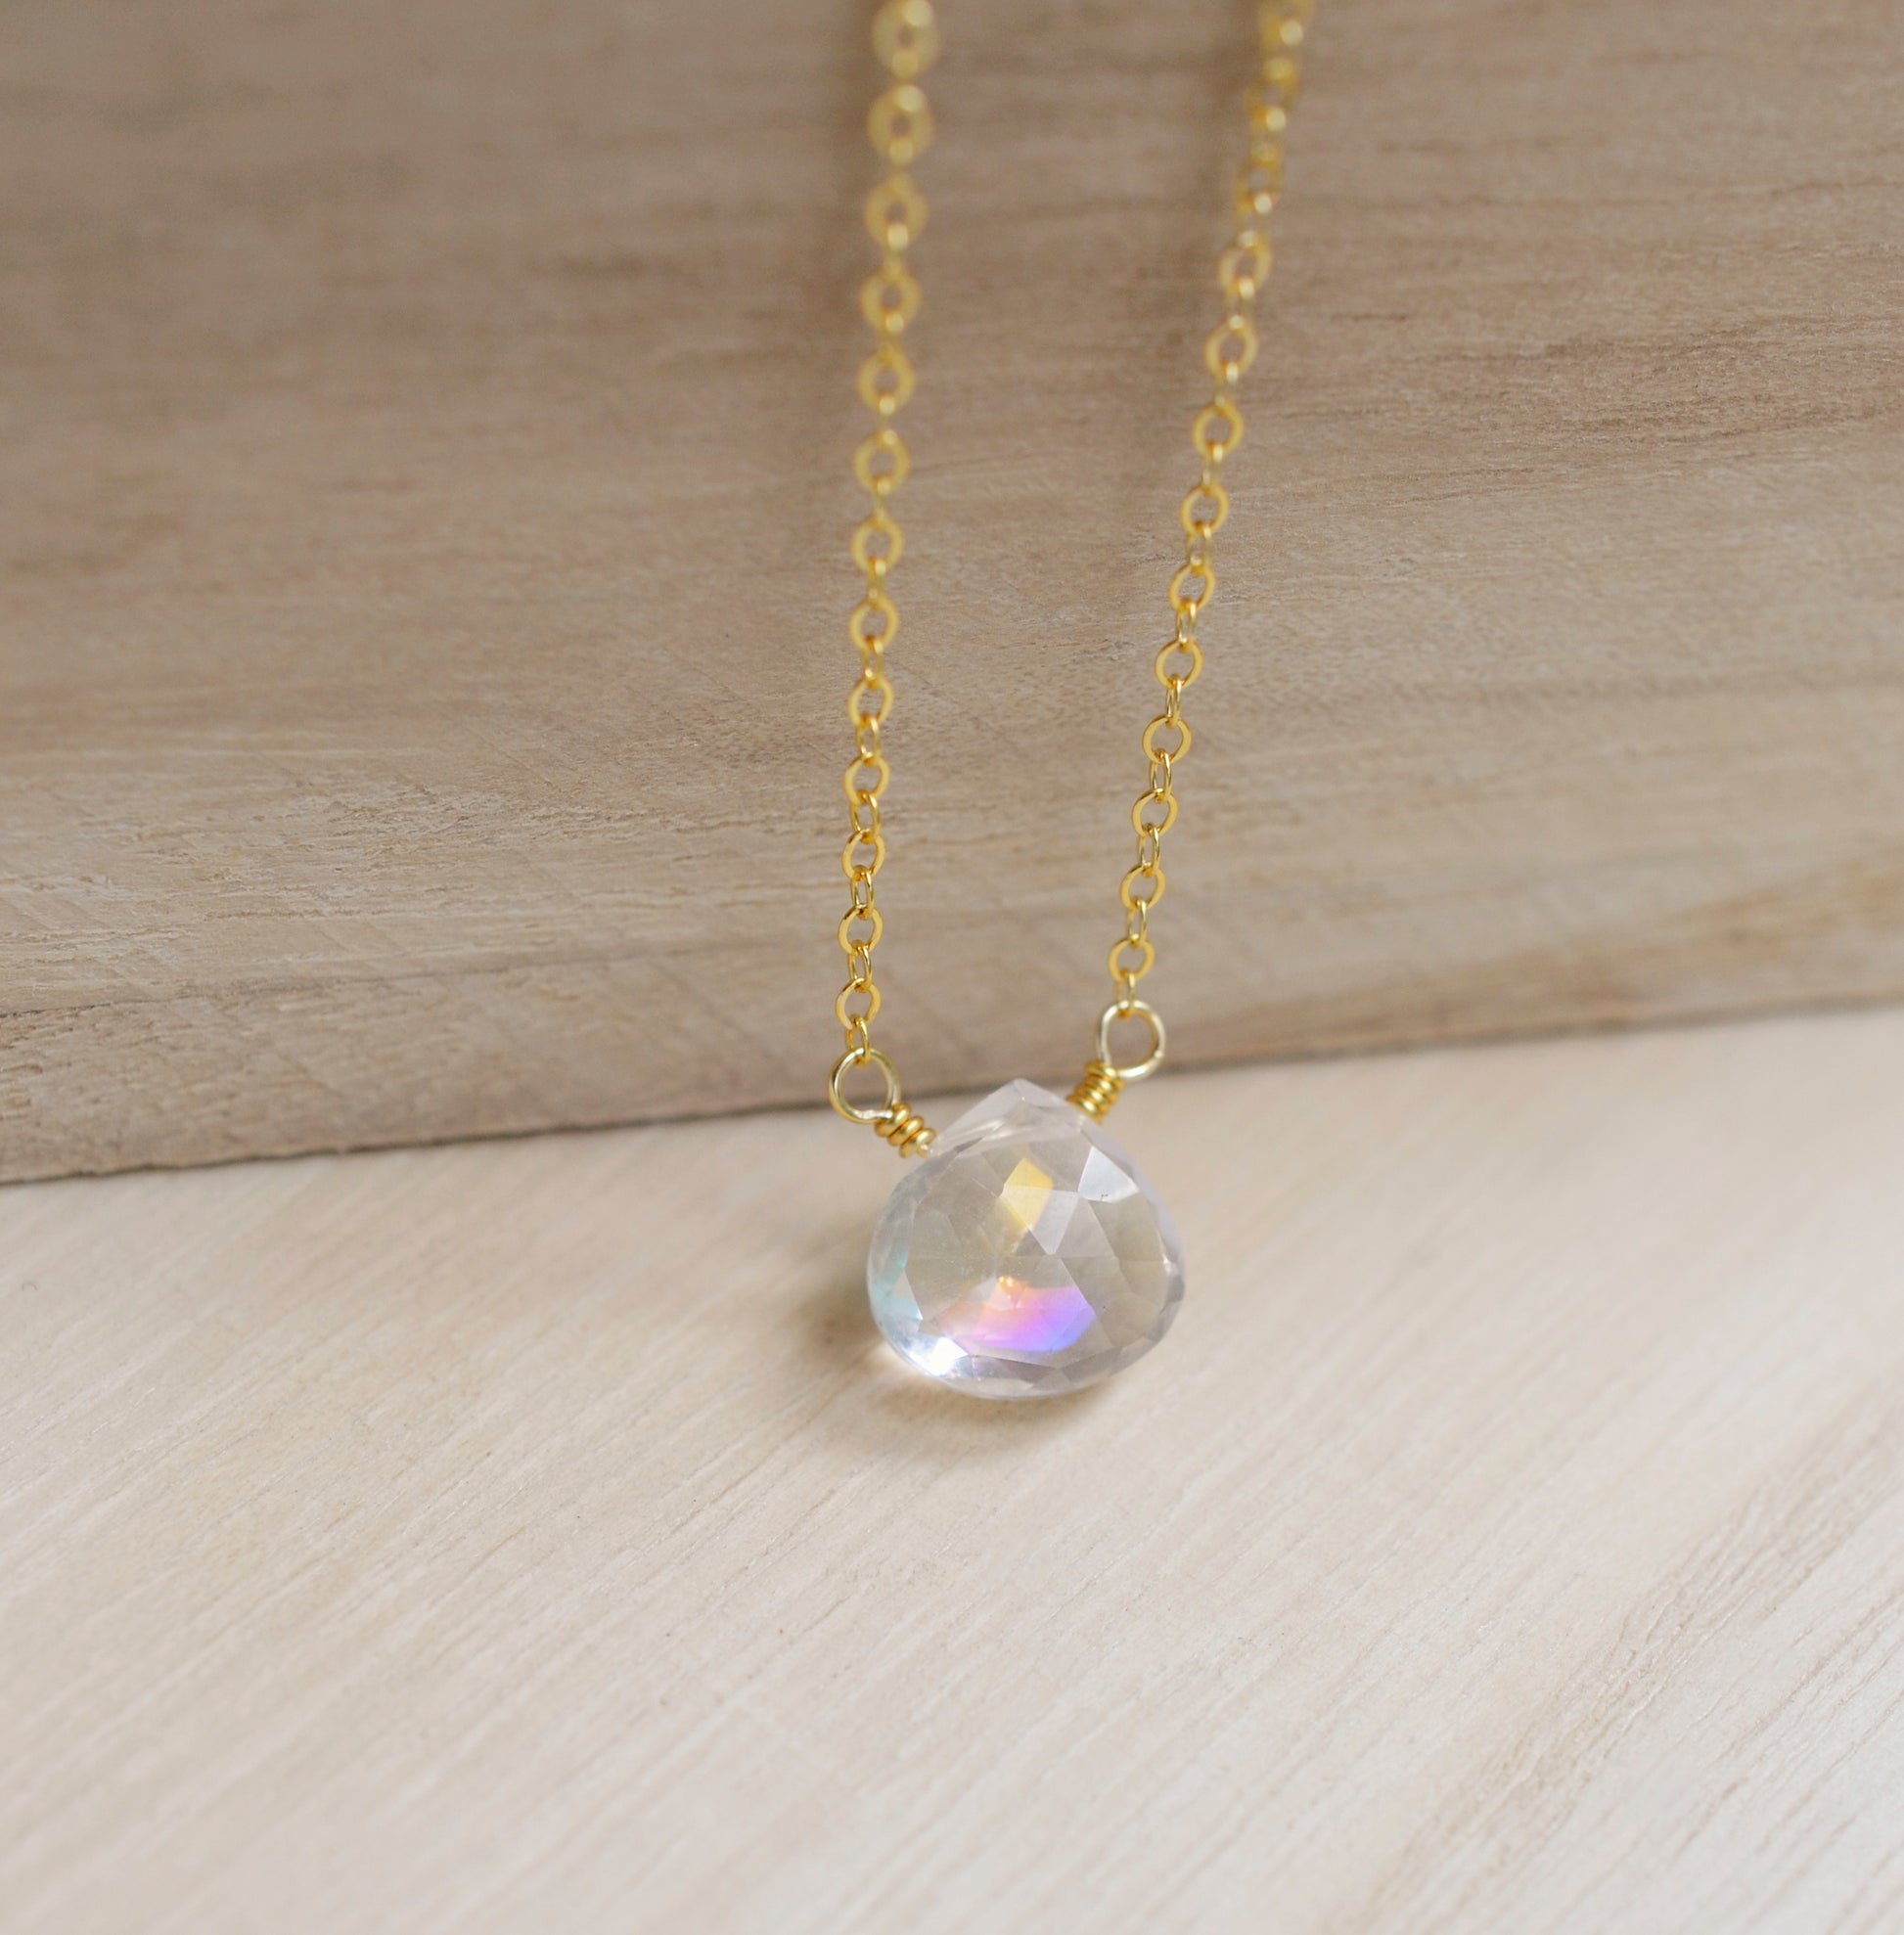 Rainbow Mystic Topaz Teardrop Necklace - Sterling Silver or Gold Filled, Gemstone Pendant